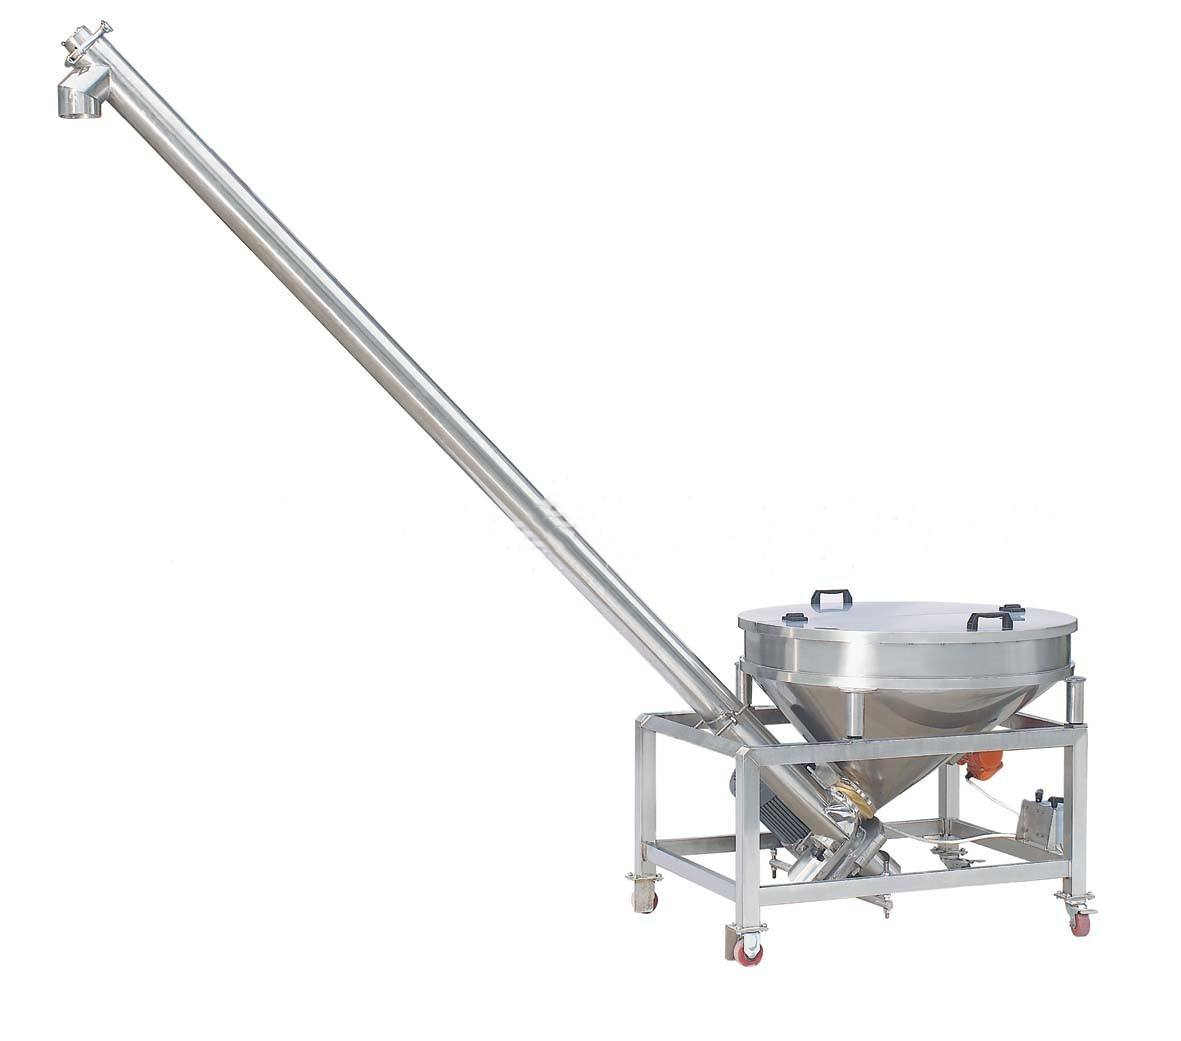 Efficient Industrial Flexible Screw Conveyor for Material Feeding Applications